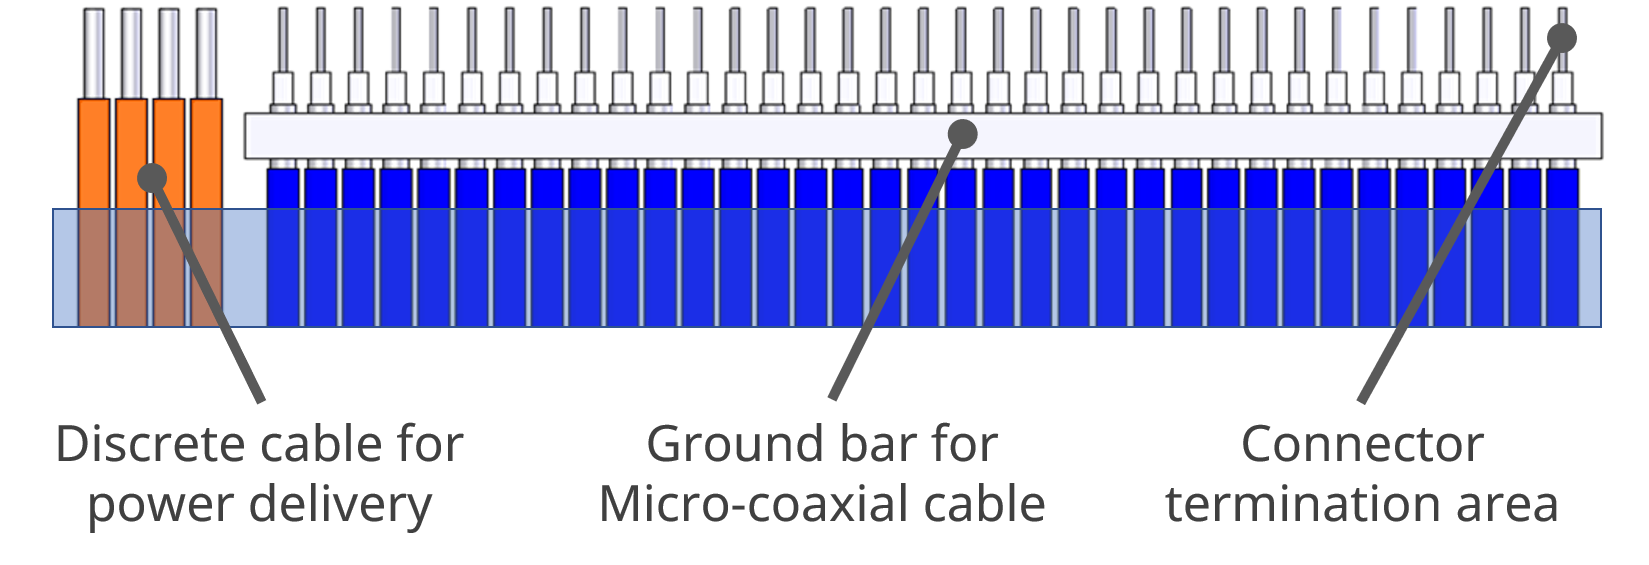 SEO-page_Micro-coaxial_F07_Harness-process_K.png